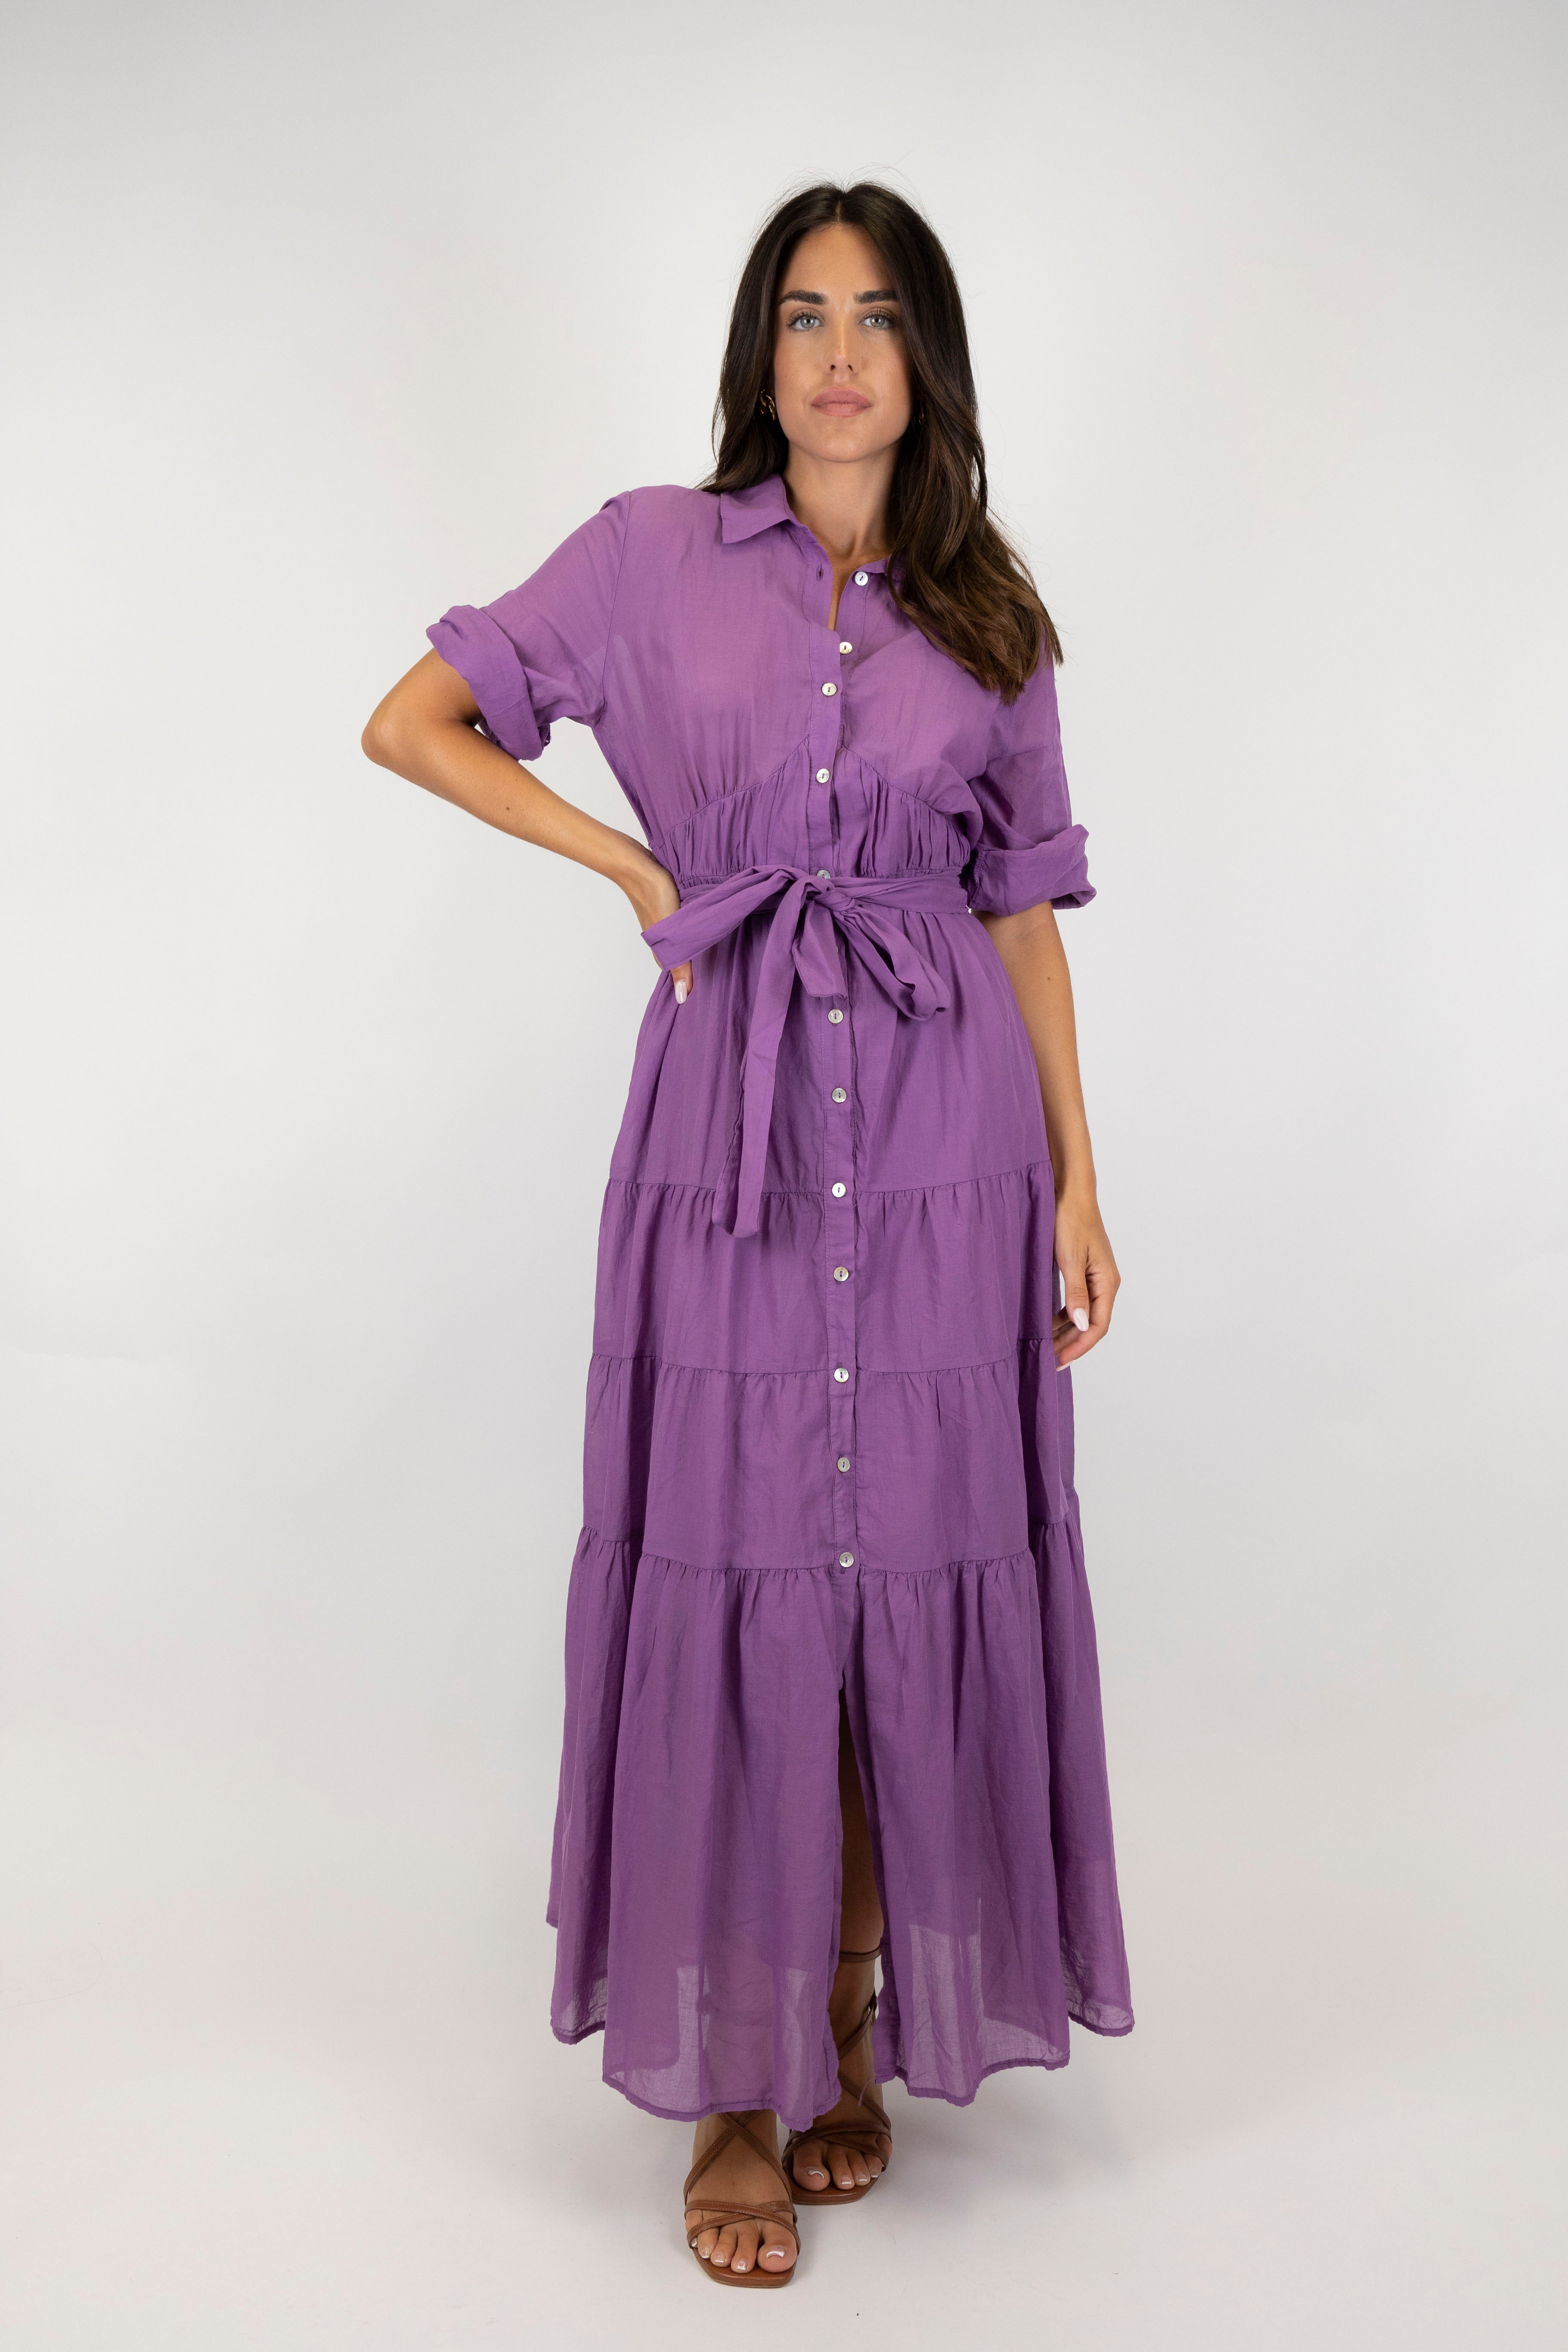 Tension in - Cotton muslin shirt dress with ruffles and fabric belt